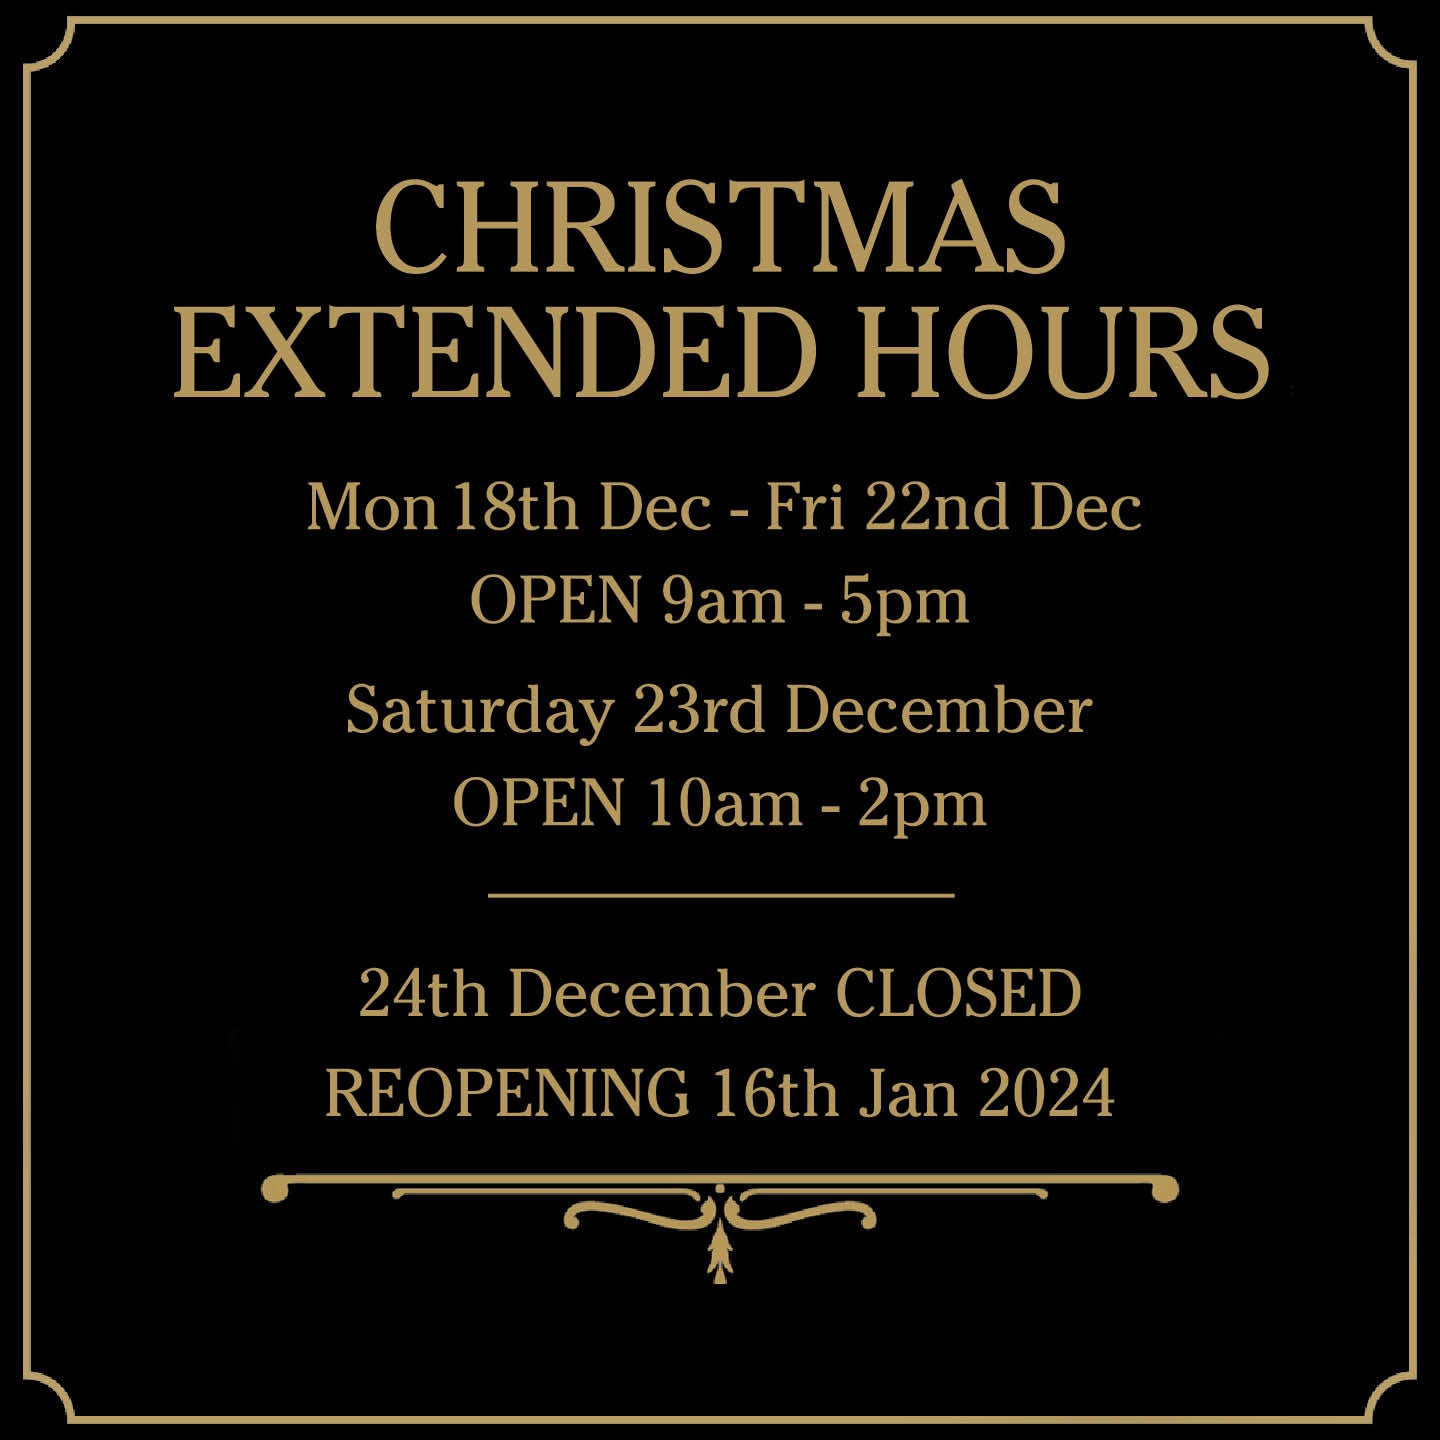 Christmas Extended Opening Hours & Closing Dates